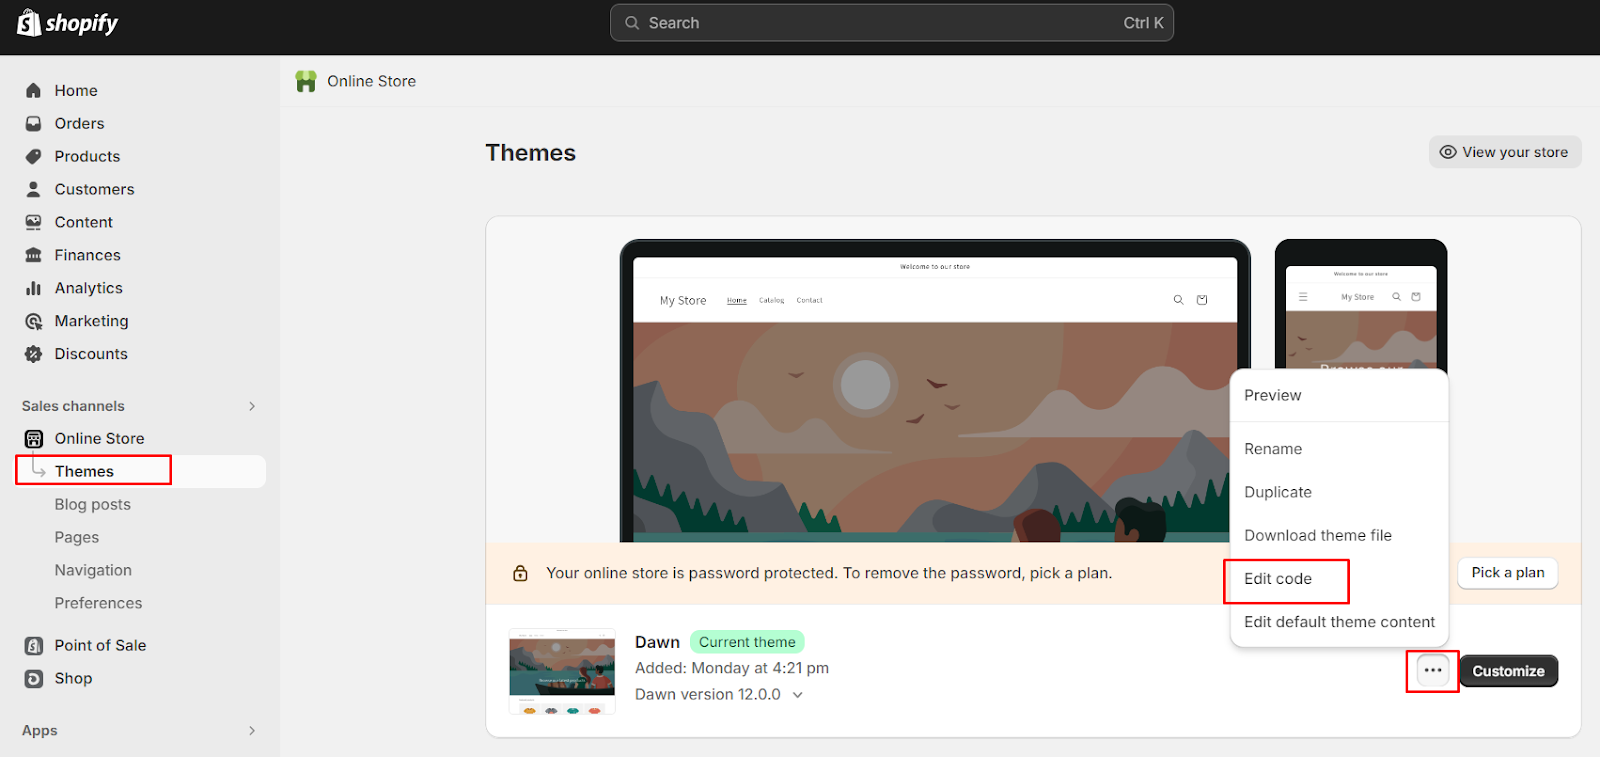 Go to Theme, click Actions